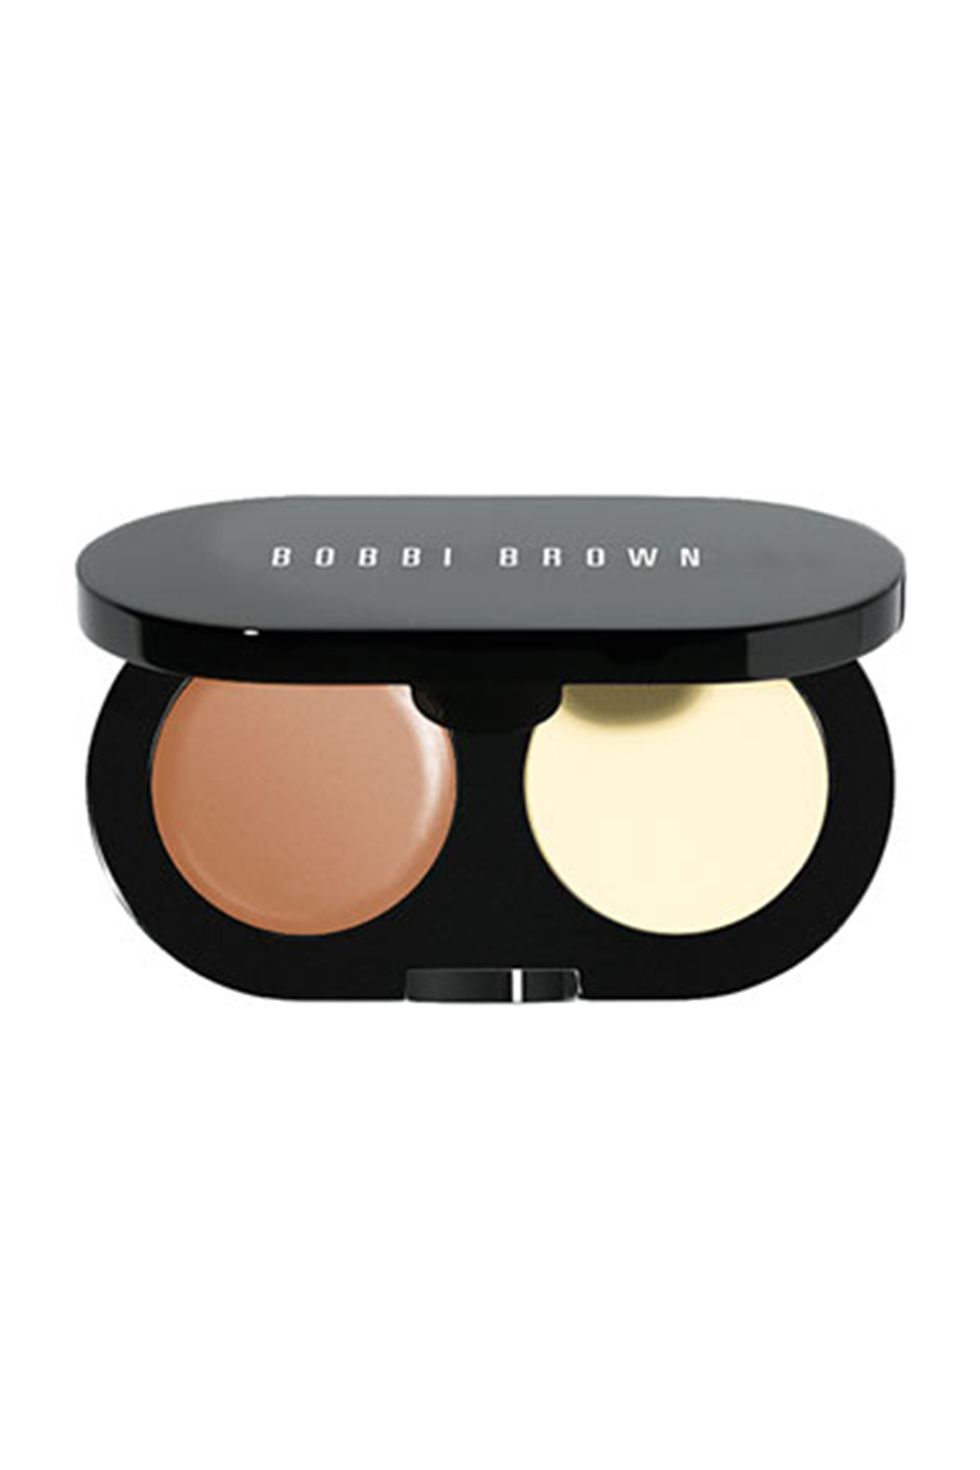 <p>Under-eye circles might have been a beauty trend in Japan, but for those who still want to brighten them up, this redness-reducing yellow-tinted concealer, plus a dusting of setting powder works wonders.</p><p><em data-redactor-tag="em" data-verified="redactor">$37, </em><a href="http://www.bobbibrowncosmetics.com/product/14018/15950/makeup/face-and-cheek/corrector-and-concealer/creamy-concealer-kit/ss11" data-tracking-id="recirc-text-link"><em data-redactor-tag="em" data-verified="redactor">bobbibrown.com</em></a></p>